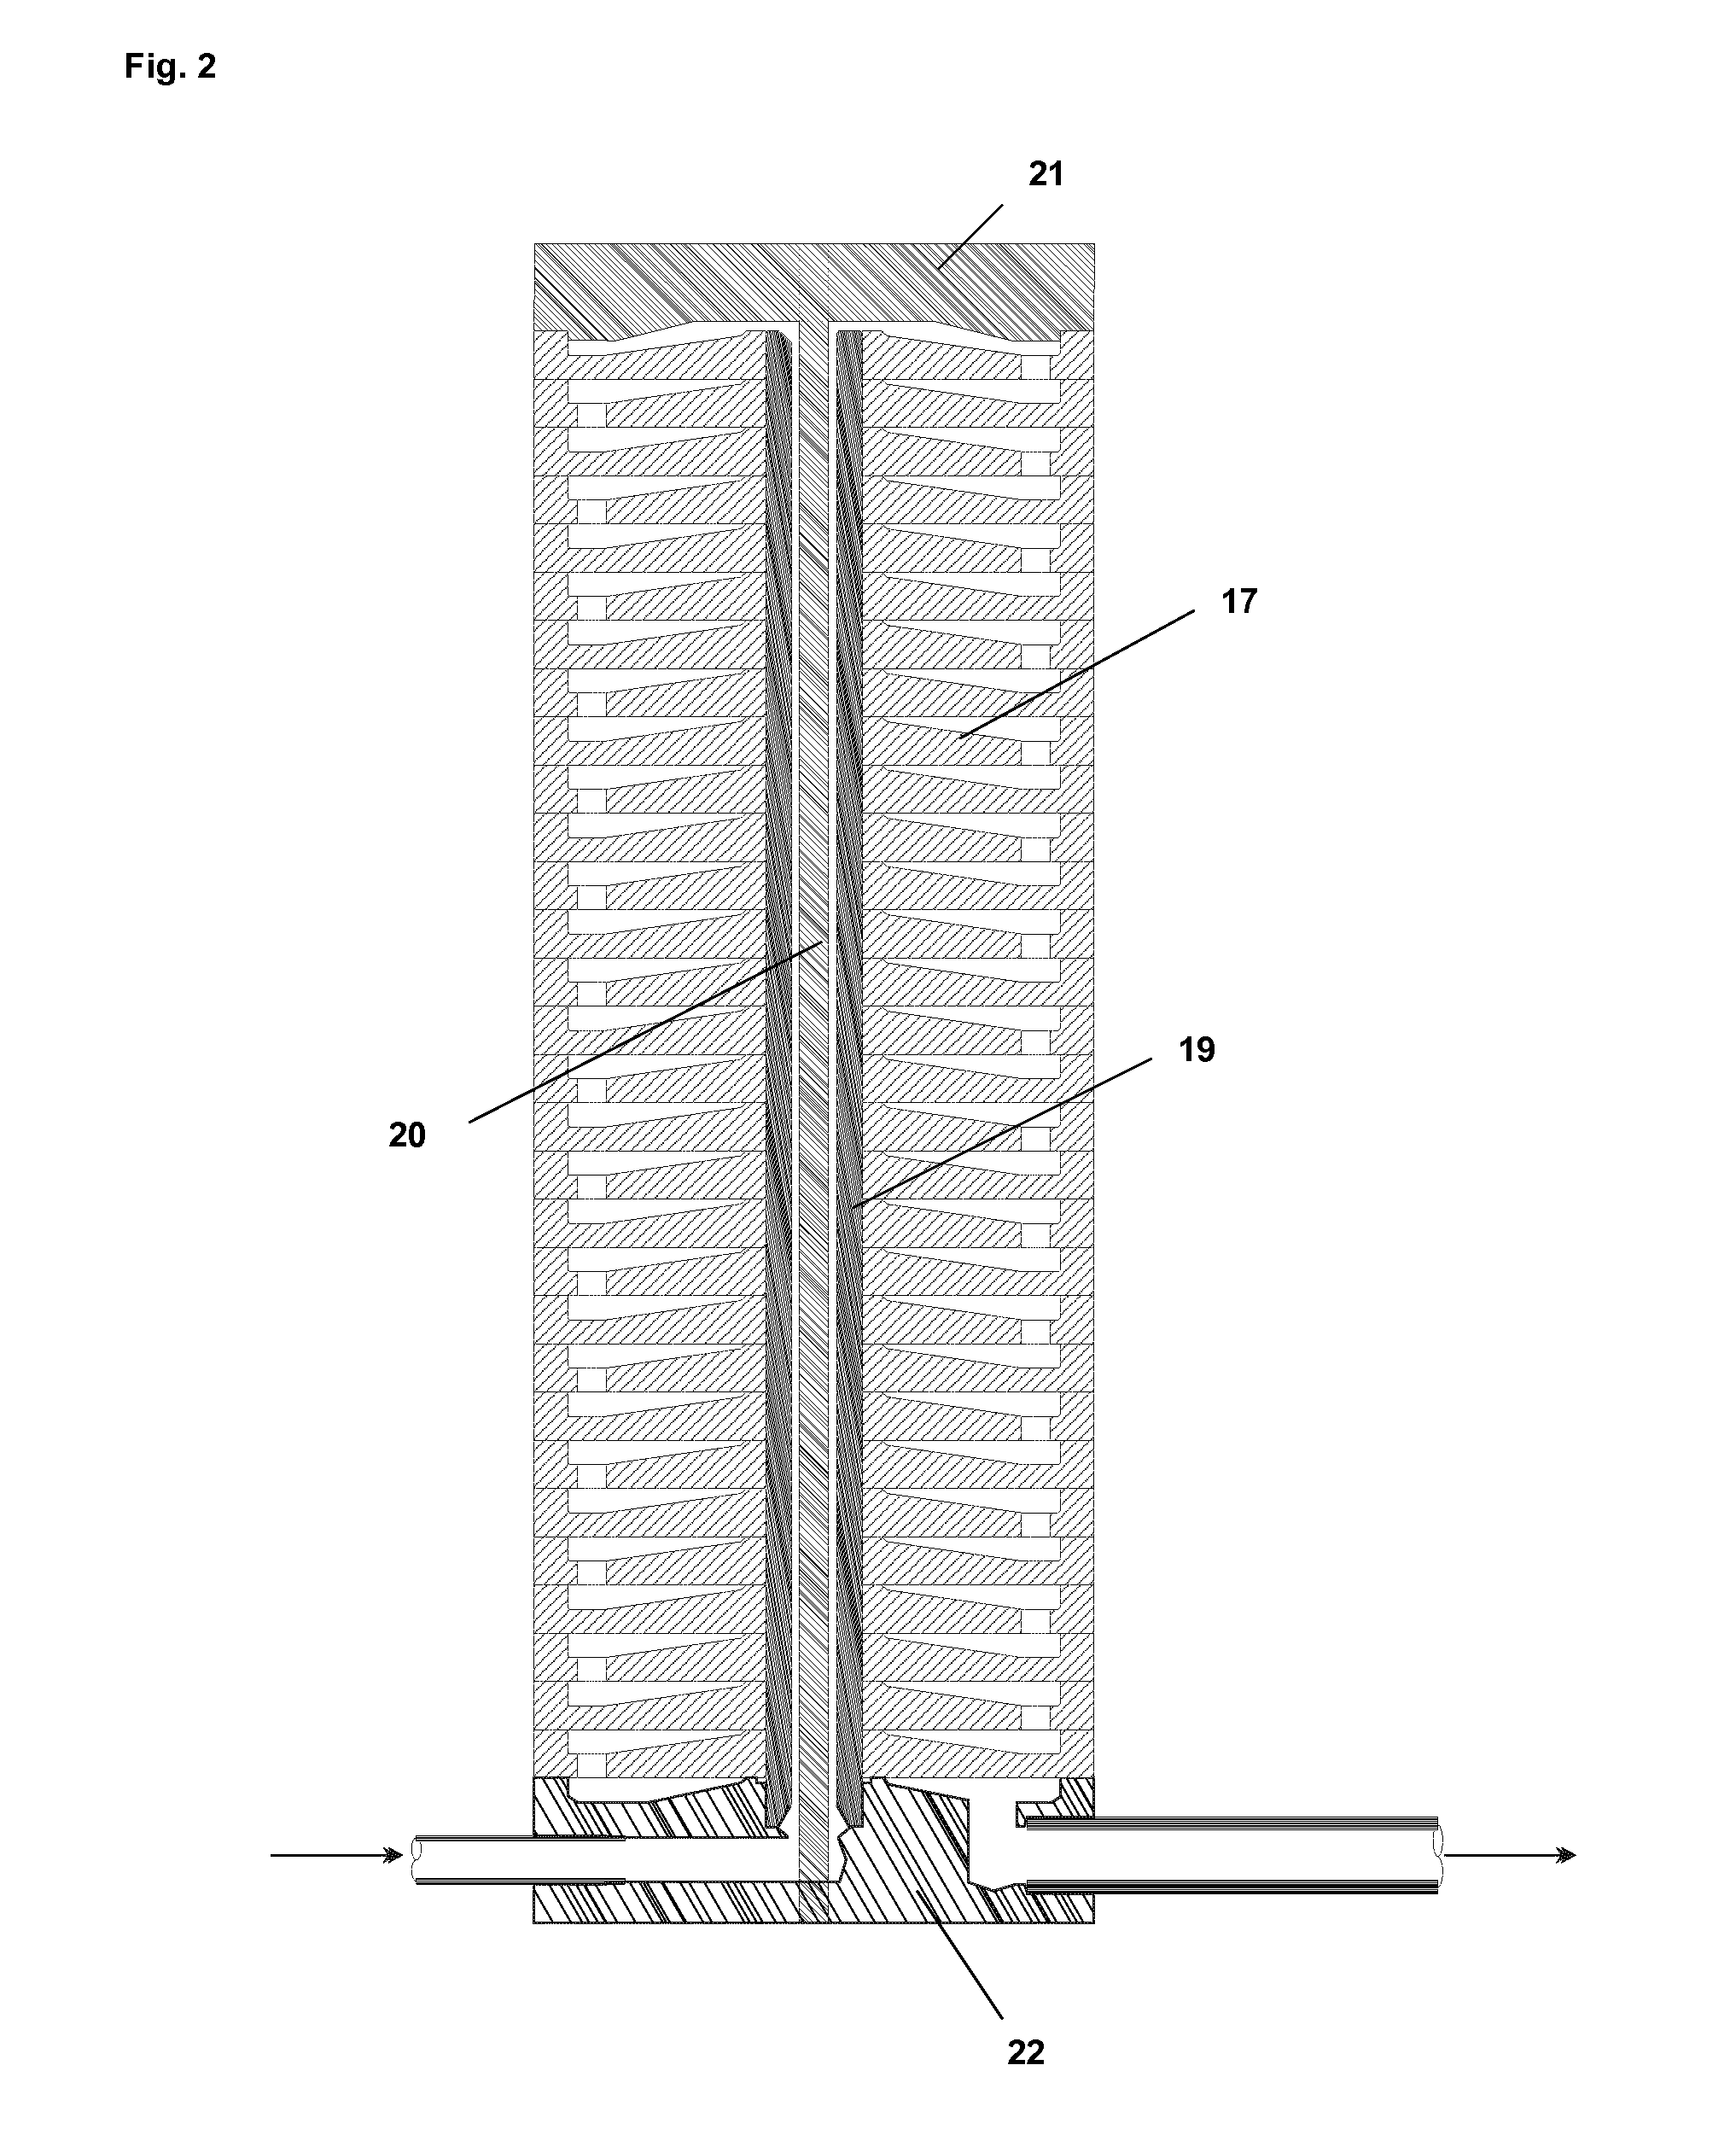 Fog-generating device comprising a reagent and ignition means